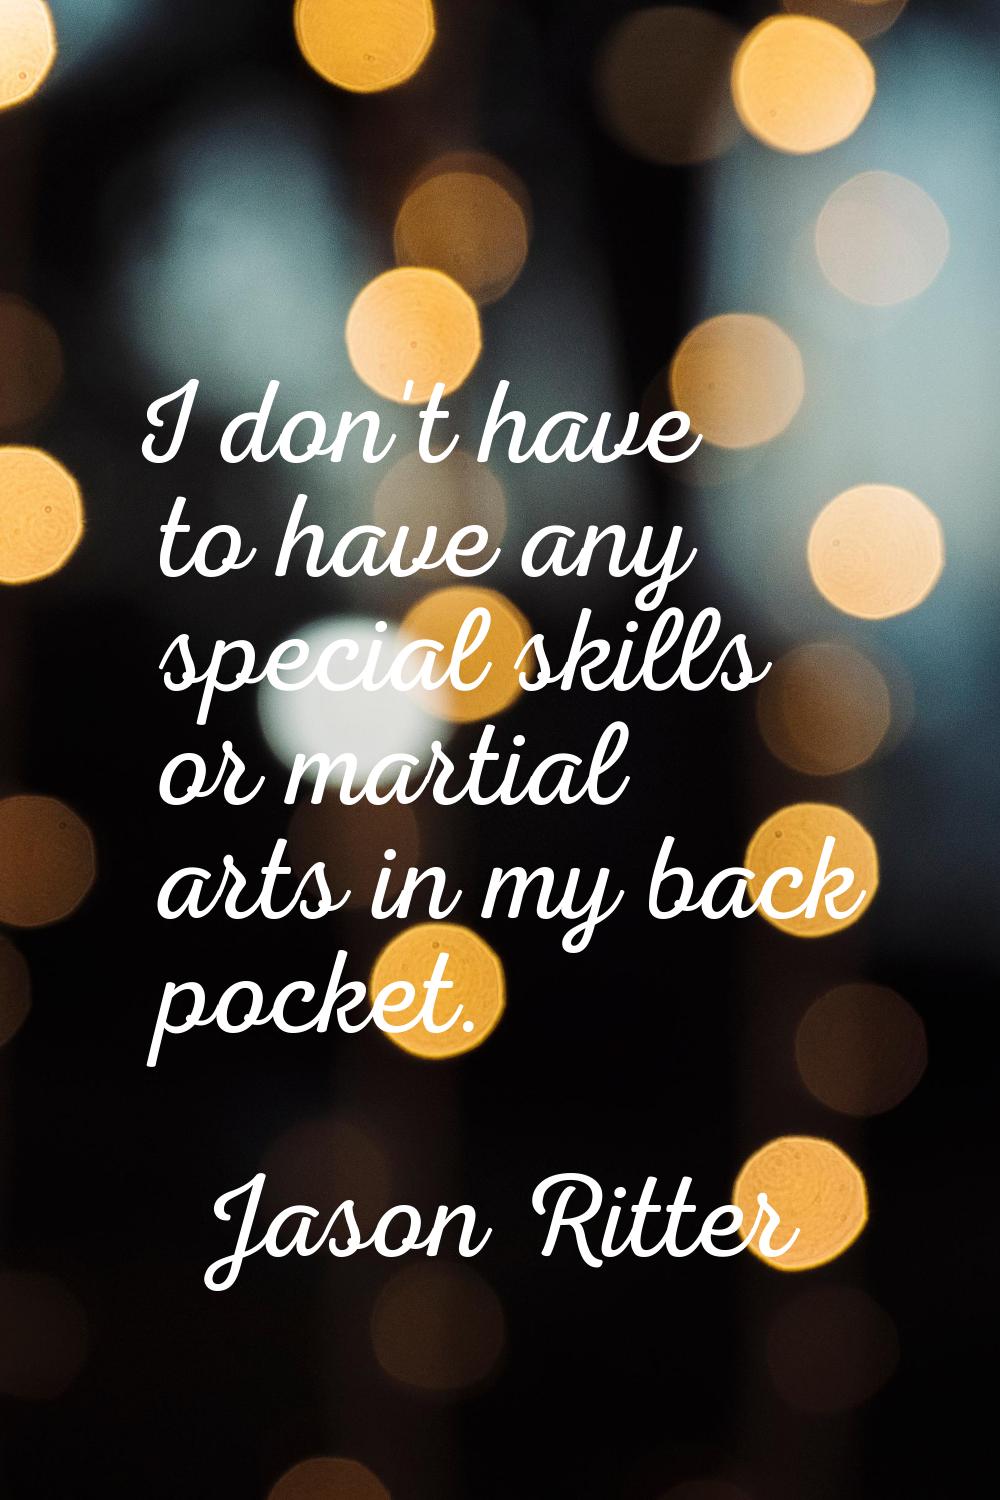 I don't have to have any special skills or martial arts in my back pocket.